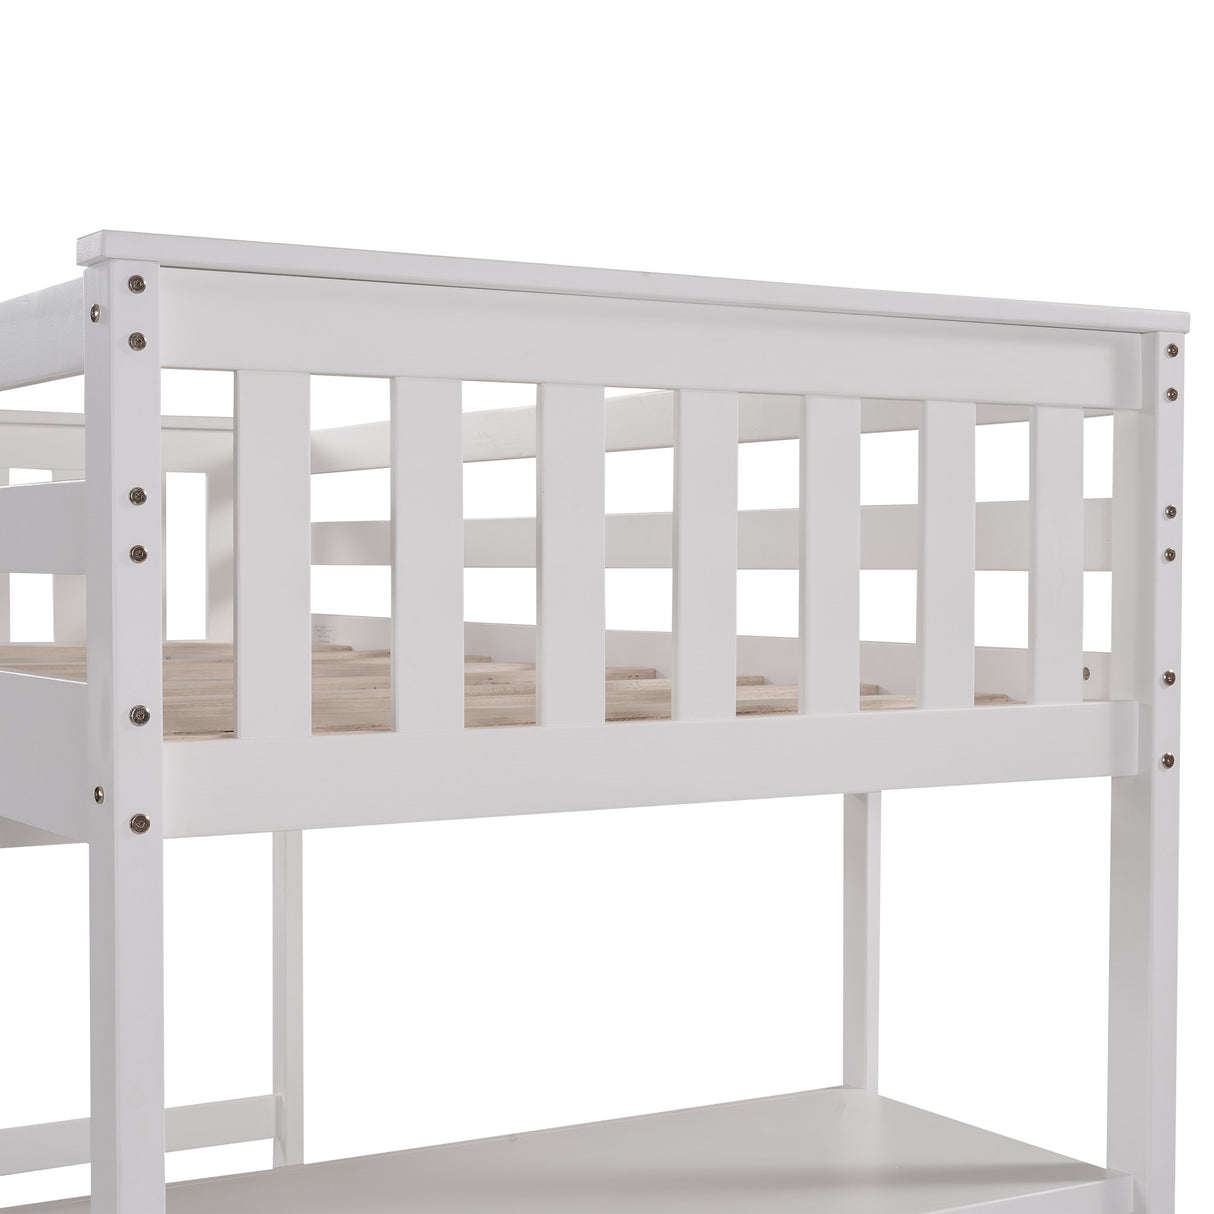 Loft Bed with Storage Shelves, Pine Wooden Loft Bed , No Box Spring Needed,Twin,White - Home Elegance USA